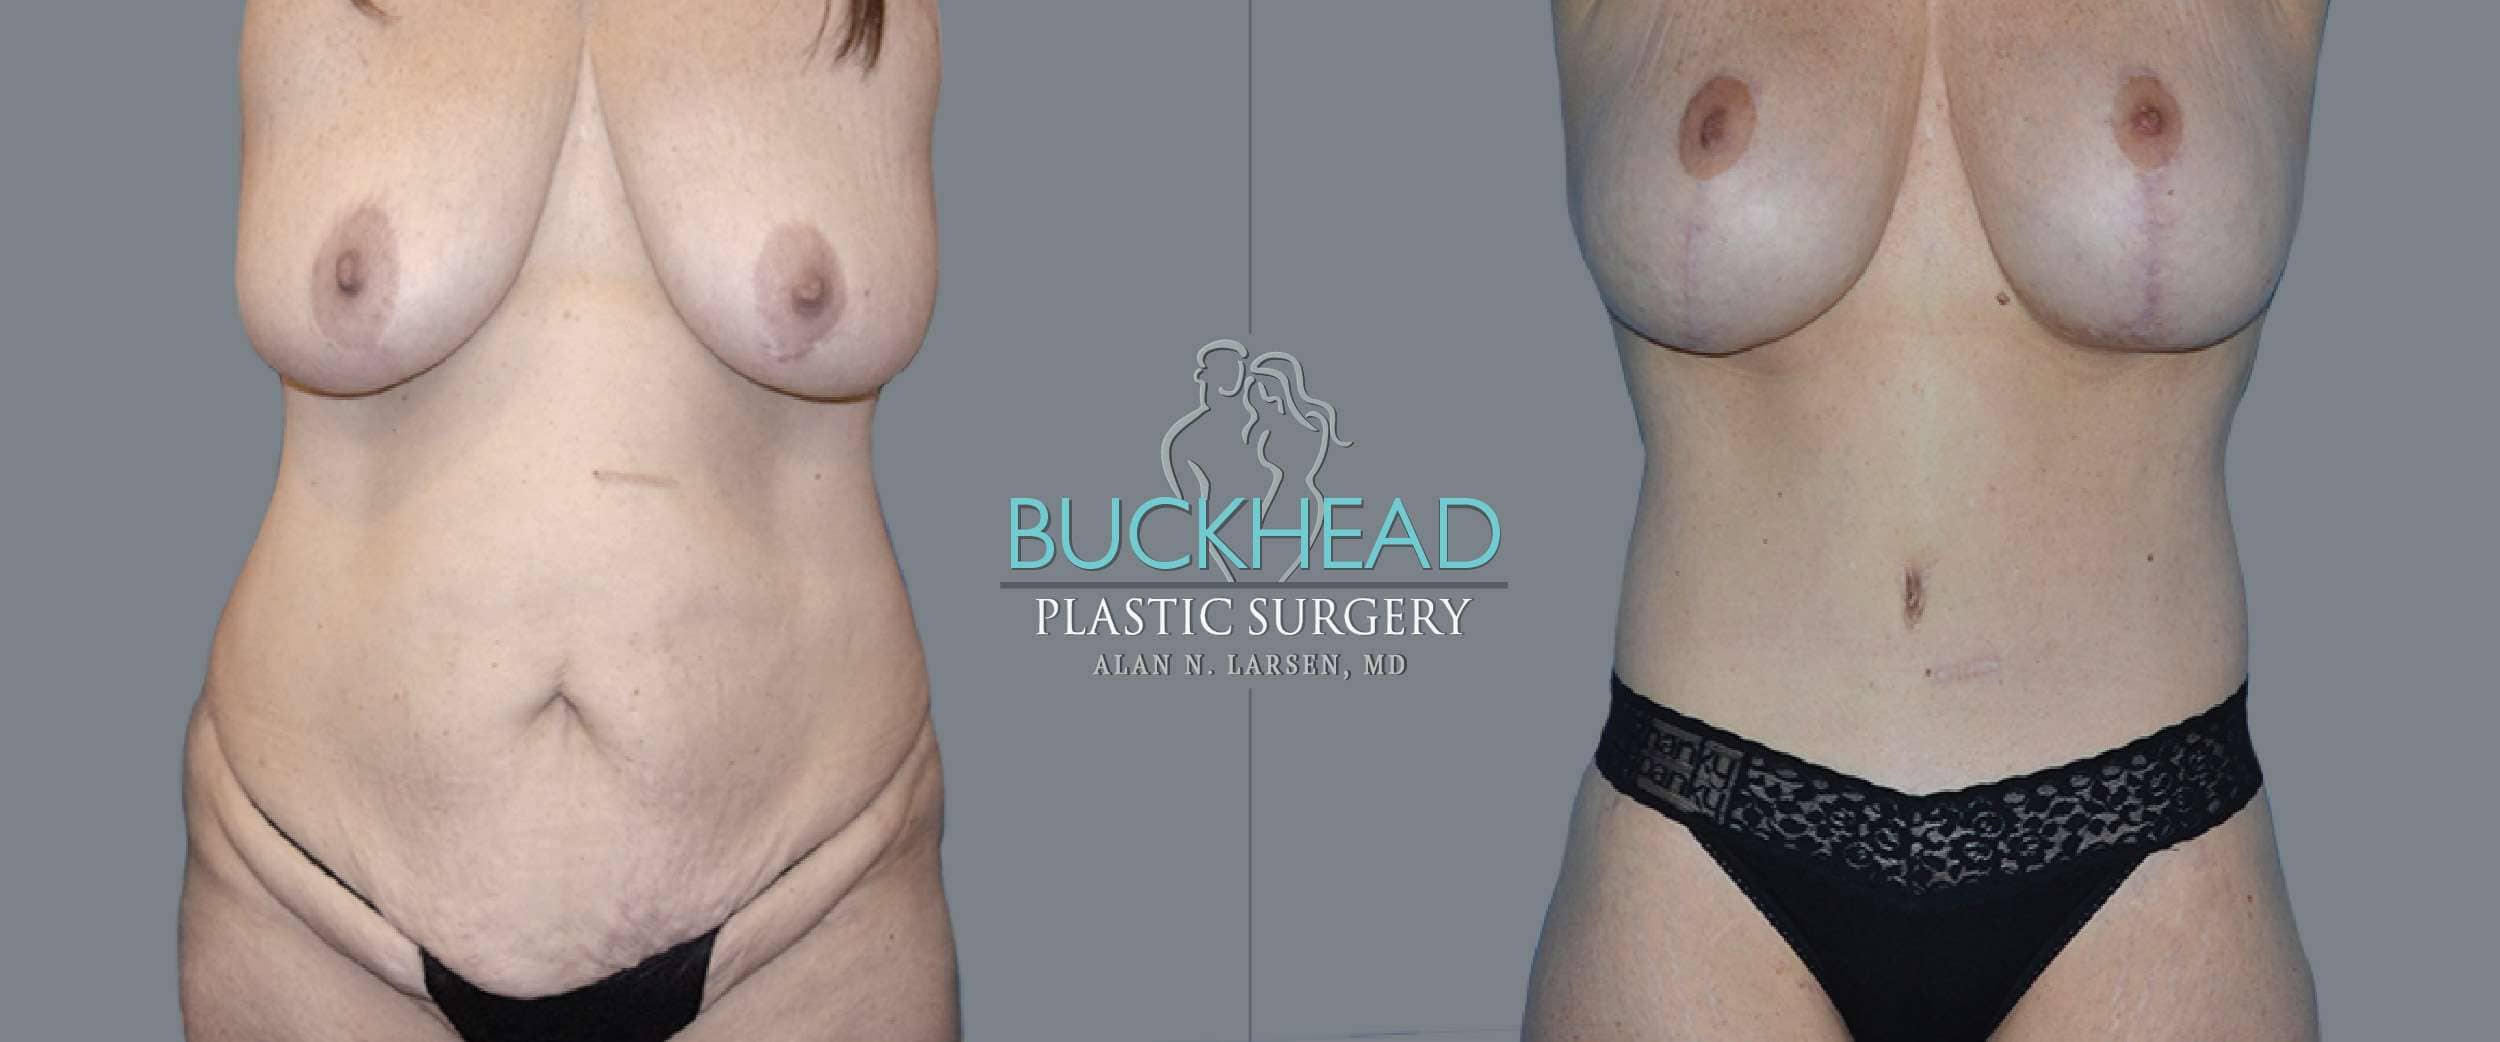 Before and After Photo gallery | Body Lift | Buckhead Plastic Surgery | Board-Certified Plastic Surgeon in Atlanta GA